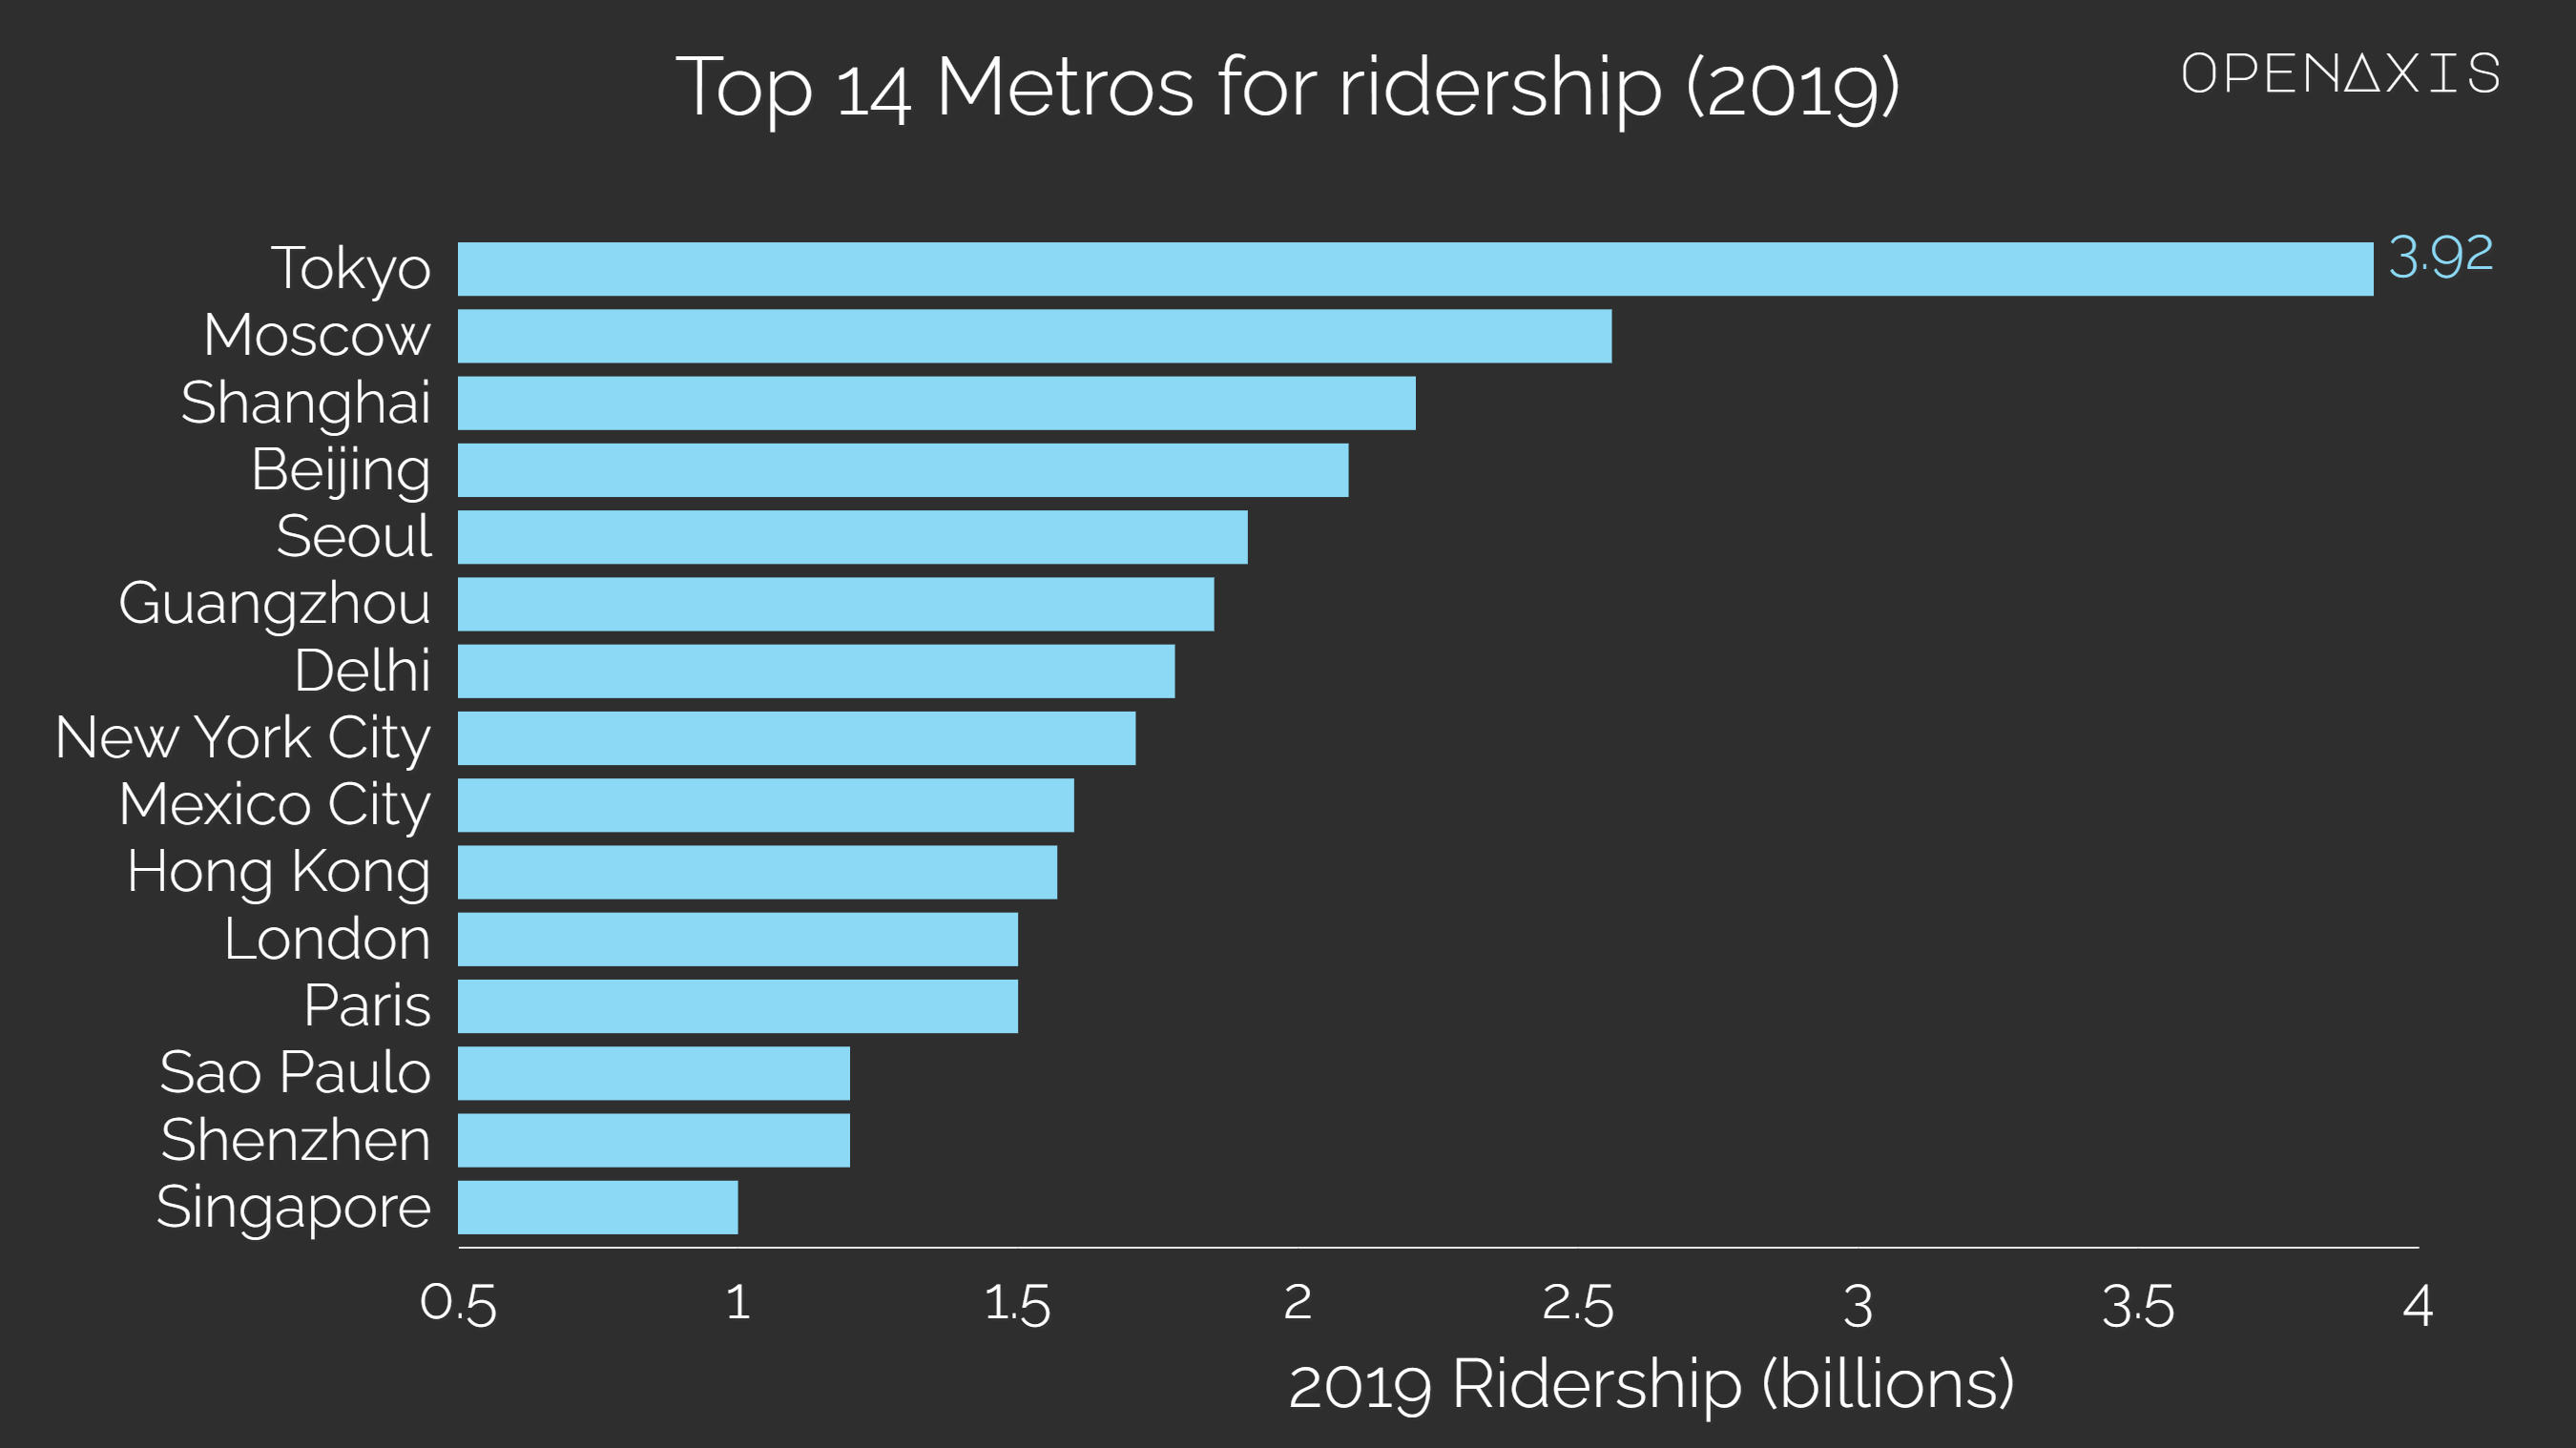 <p>Metro ridership across the world was heavily affected by COVID-19. Of the top 10 busiest metros in 2019, New York lost close to two thirds of passenger volume in 2020. This was the biggest drop excluding Delhi, which was closed for over five months in 20202 . In other cities of the top 10, the drop in ridership was at least 27%, except in Shenzhen (-13%). The particularly high increase of the size of Shenzhen’s network (by one third) that year may partially explain the relatively small drop.</p><p><br /></p><p>Annual ridership went down globally by 40% between 2019 and 2020. The region most impacted was North America (-63%). The decrease was somewhere between 45% and 50% in Europe, Latin America and MENA3 . The least affected regions were Asia-Pacific (-32%) and Eurasia (-39%).</p><p><br /></p><p>﻿<a href="http:///search?q=%23transportation" target="_blank">#transportation</a>﻿ </p><p><br /></p><p>Source: <a href="https://app.openaxis.com/data/3760" target="_blank">International Association of Public Transport (UITP)</a></p><p><br /></p>